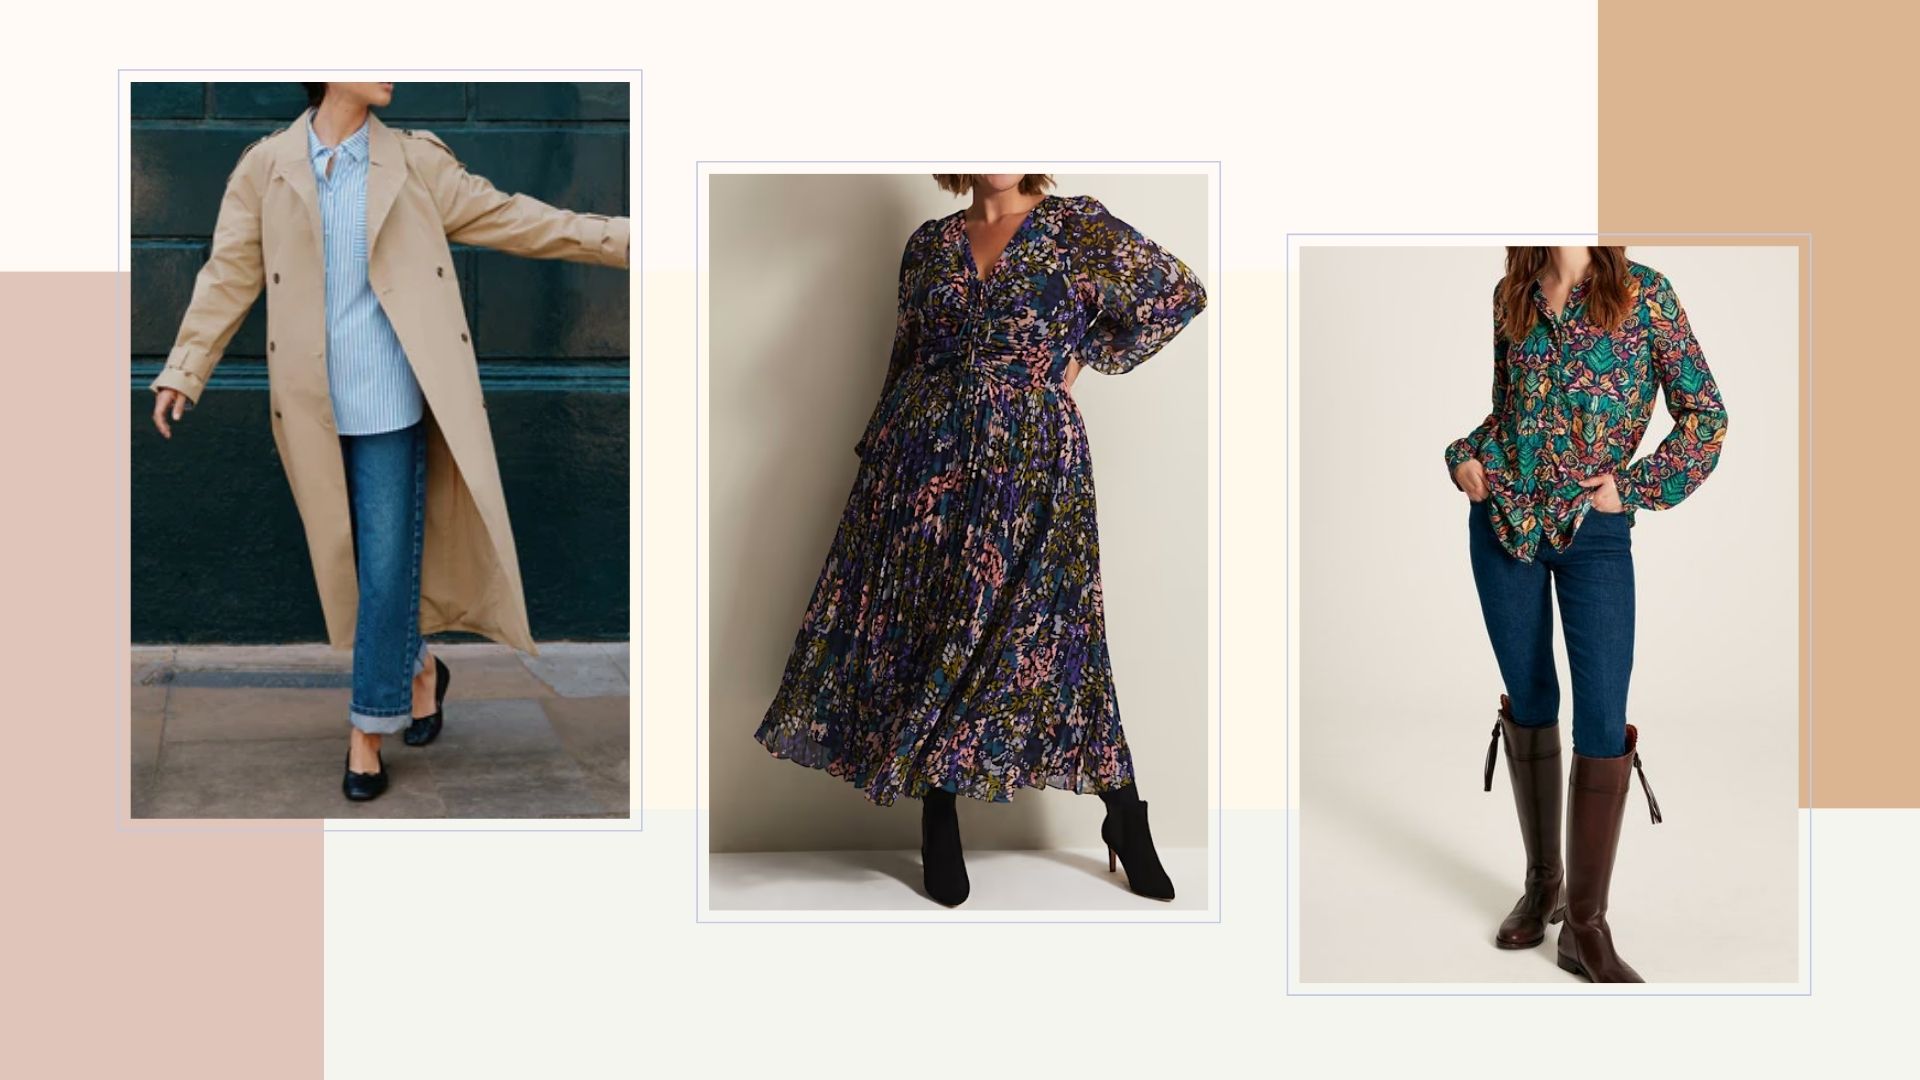 Autumn outfit ideas for women over 50, from a 50-something fashion editor